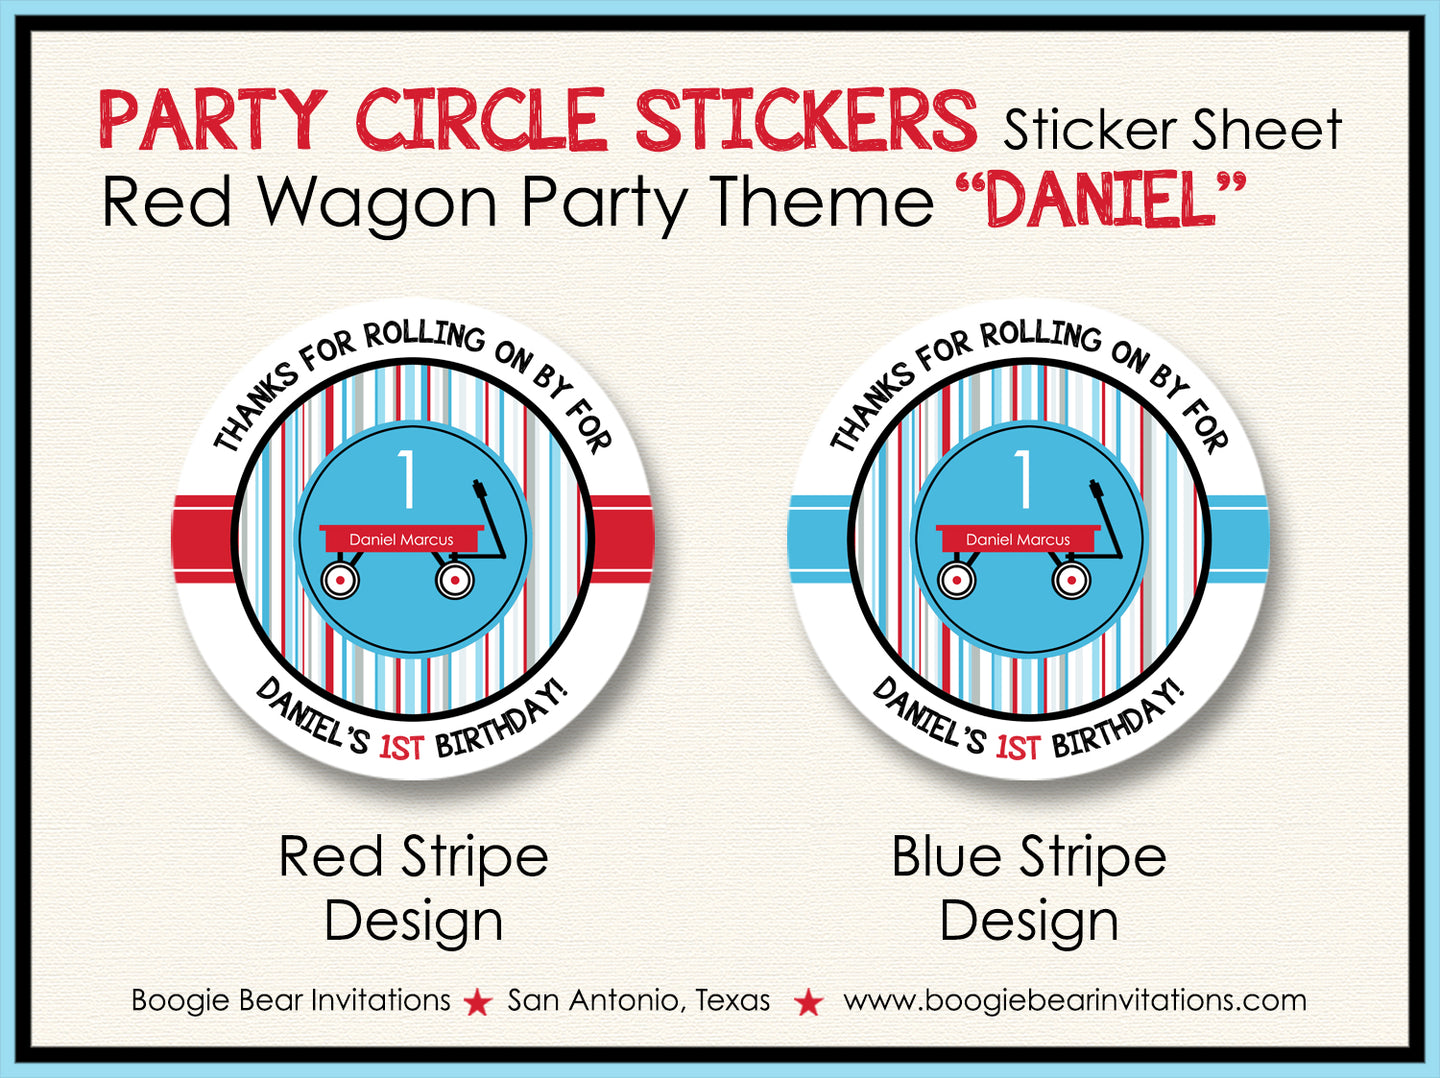 Red Wagon Party Circle Stickers Birthday Sheet Round Boogie Bear Invitations Daniel Theme